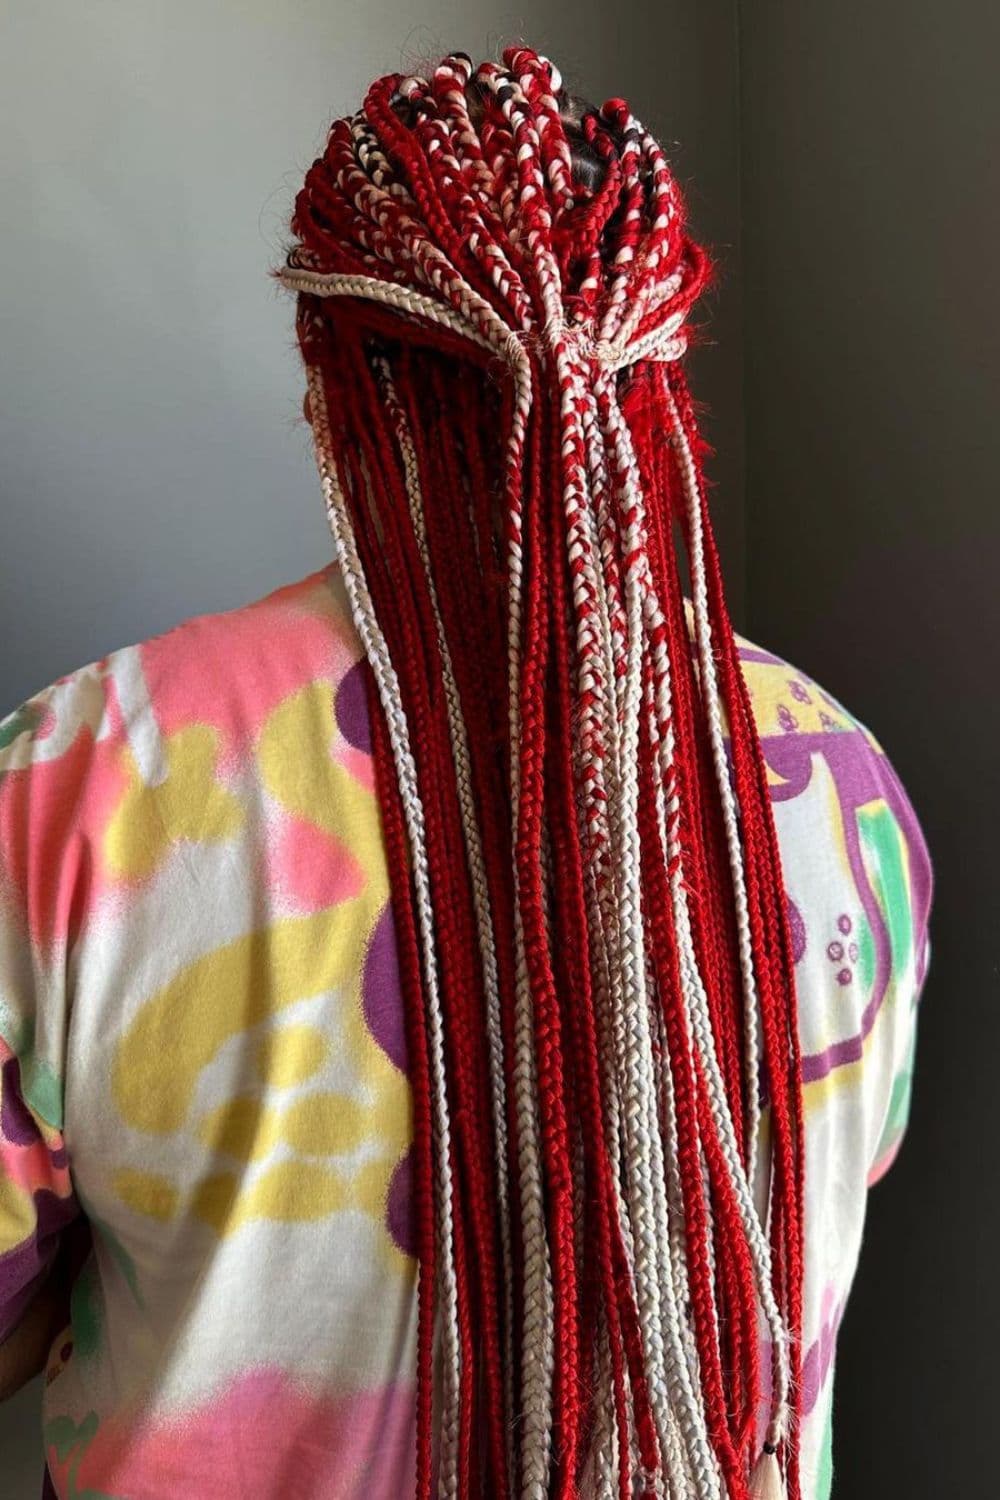 A man with red and white two-toned braids.